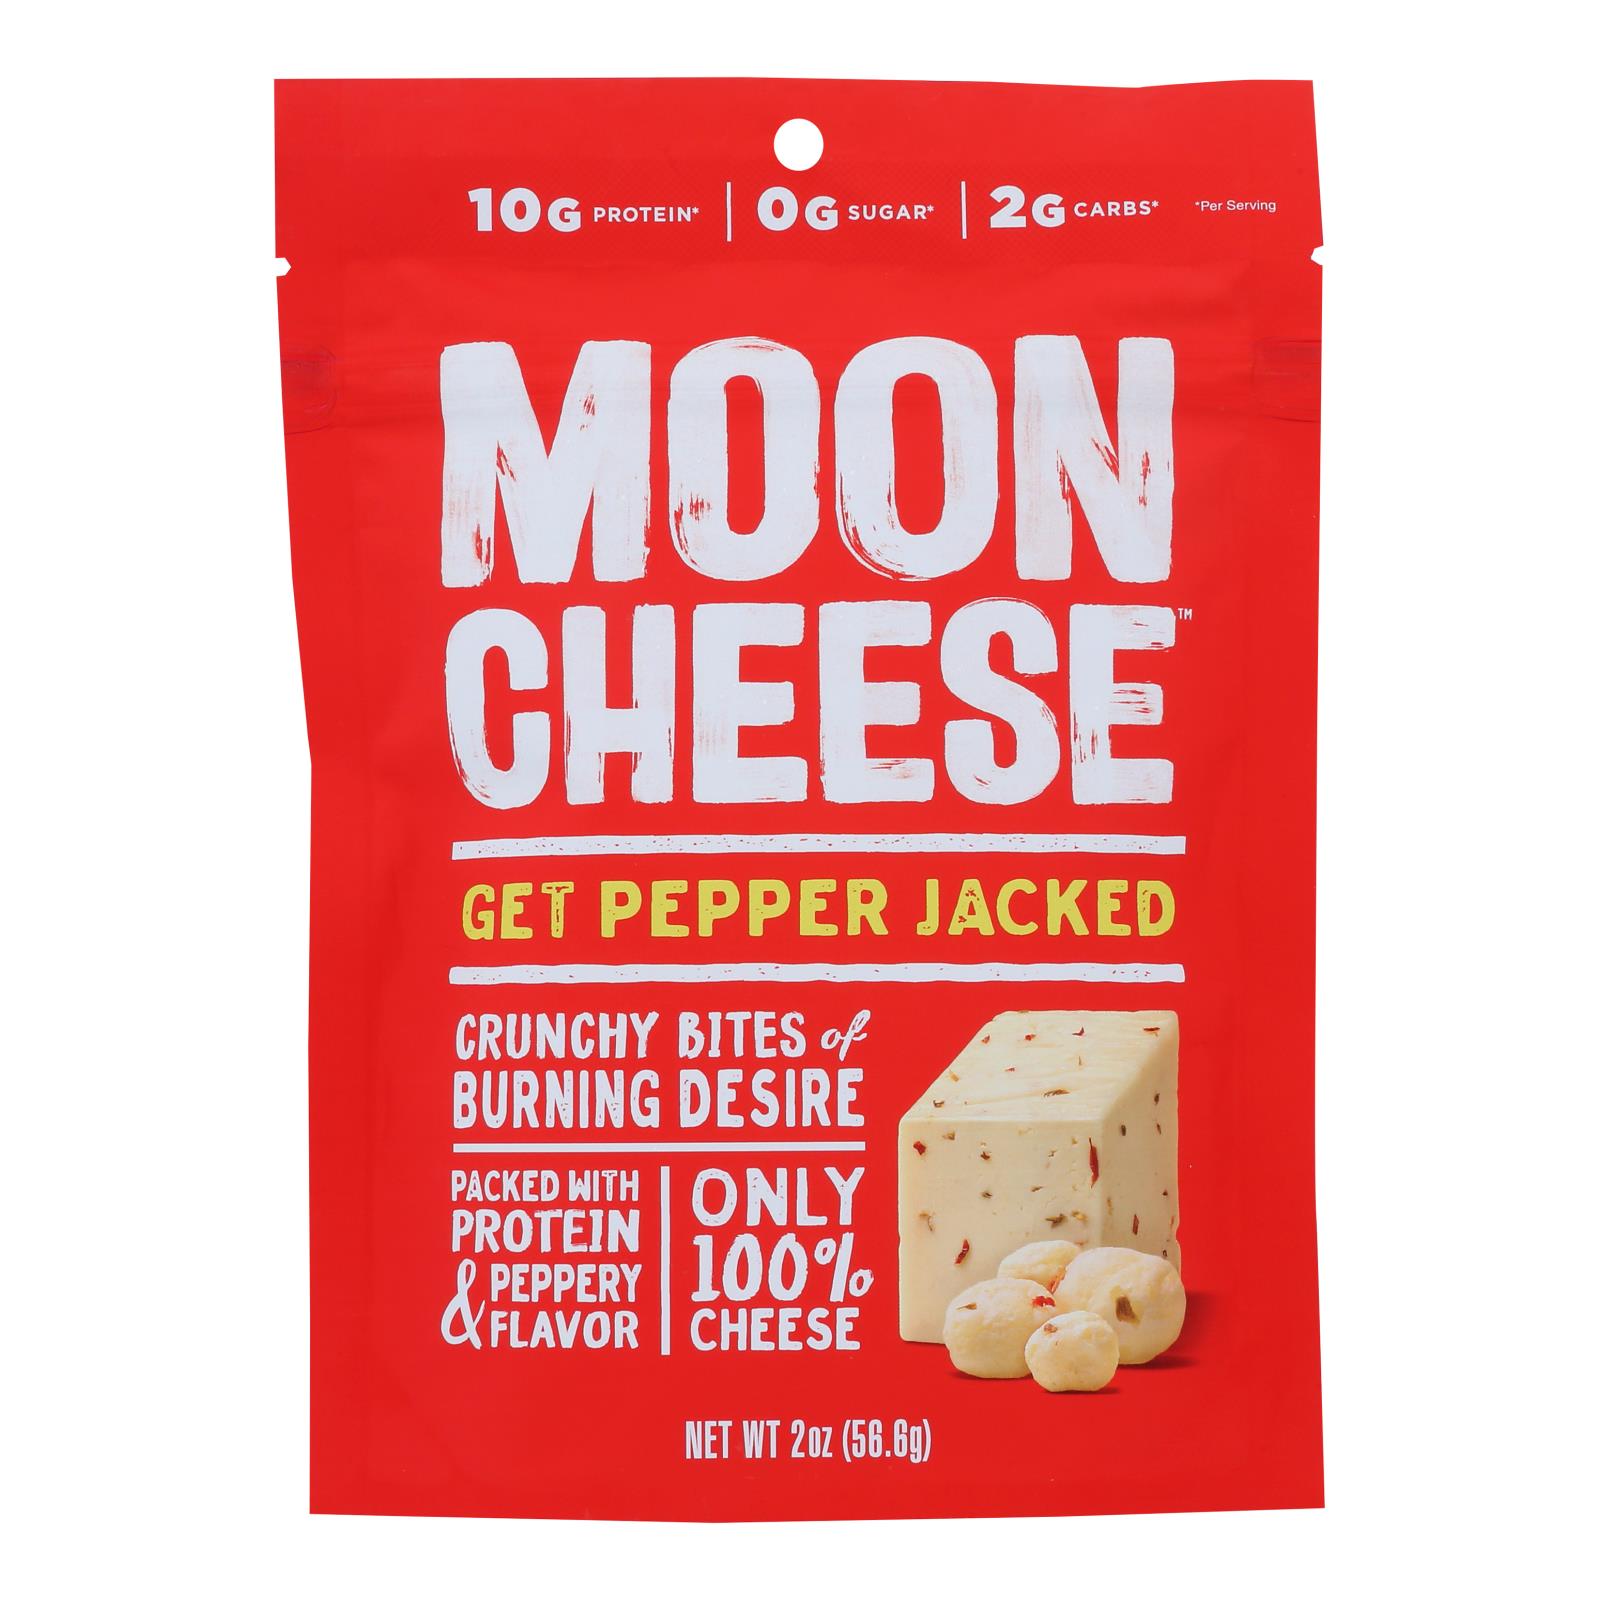 Moon Cheese's Pepper Jack Dehydrated Cheese Snack - 12개 묶음상품 - 2 OZ